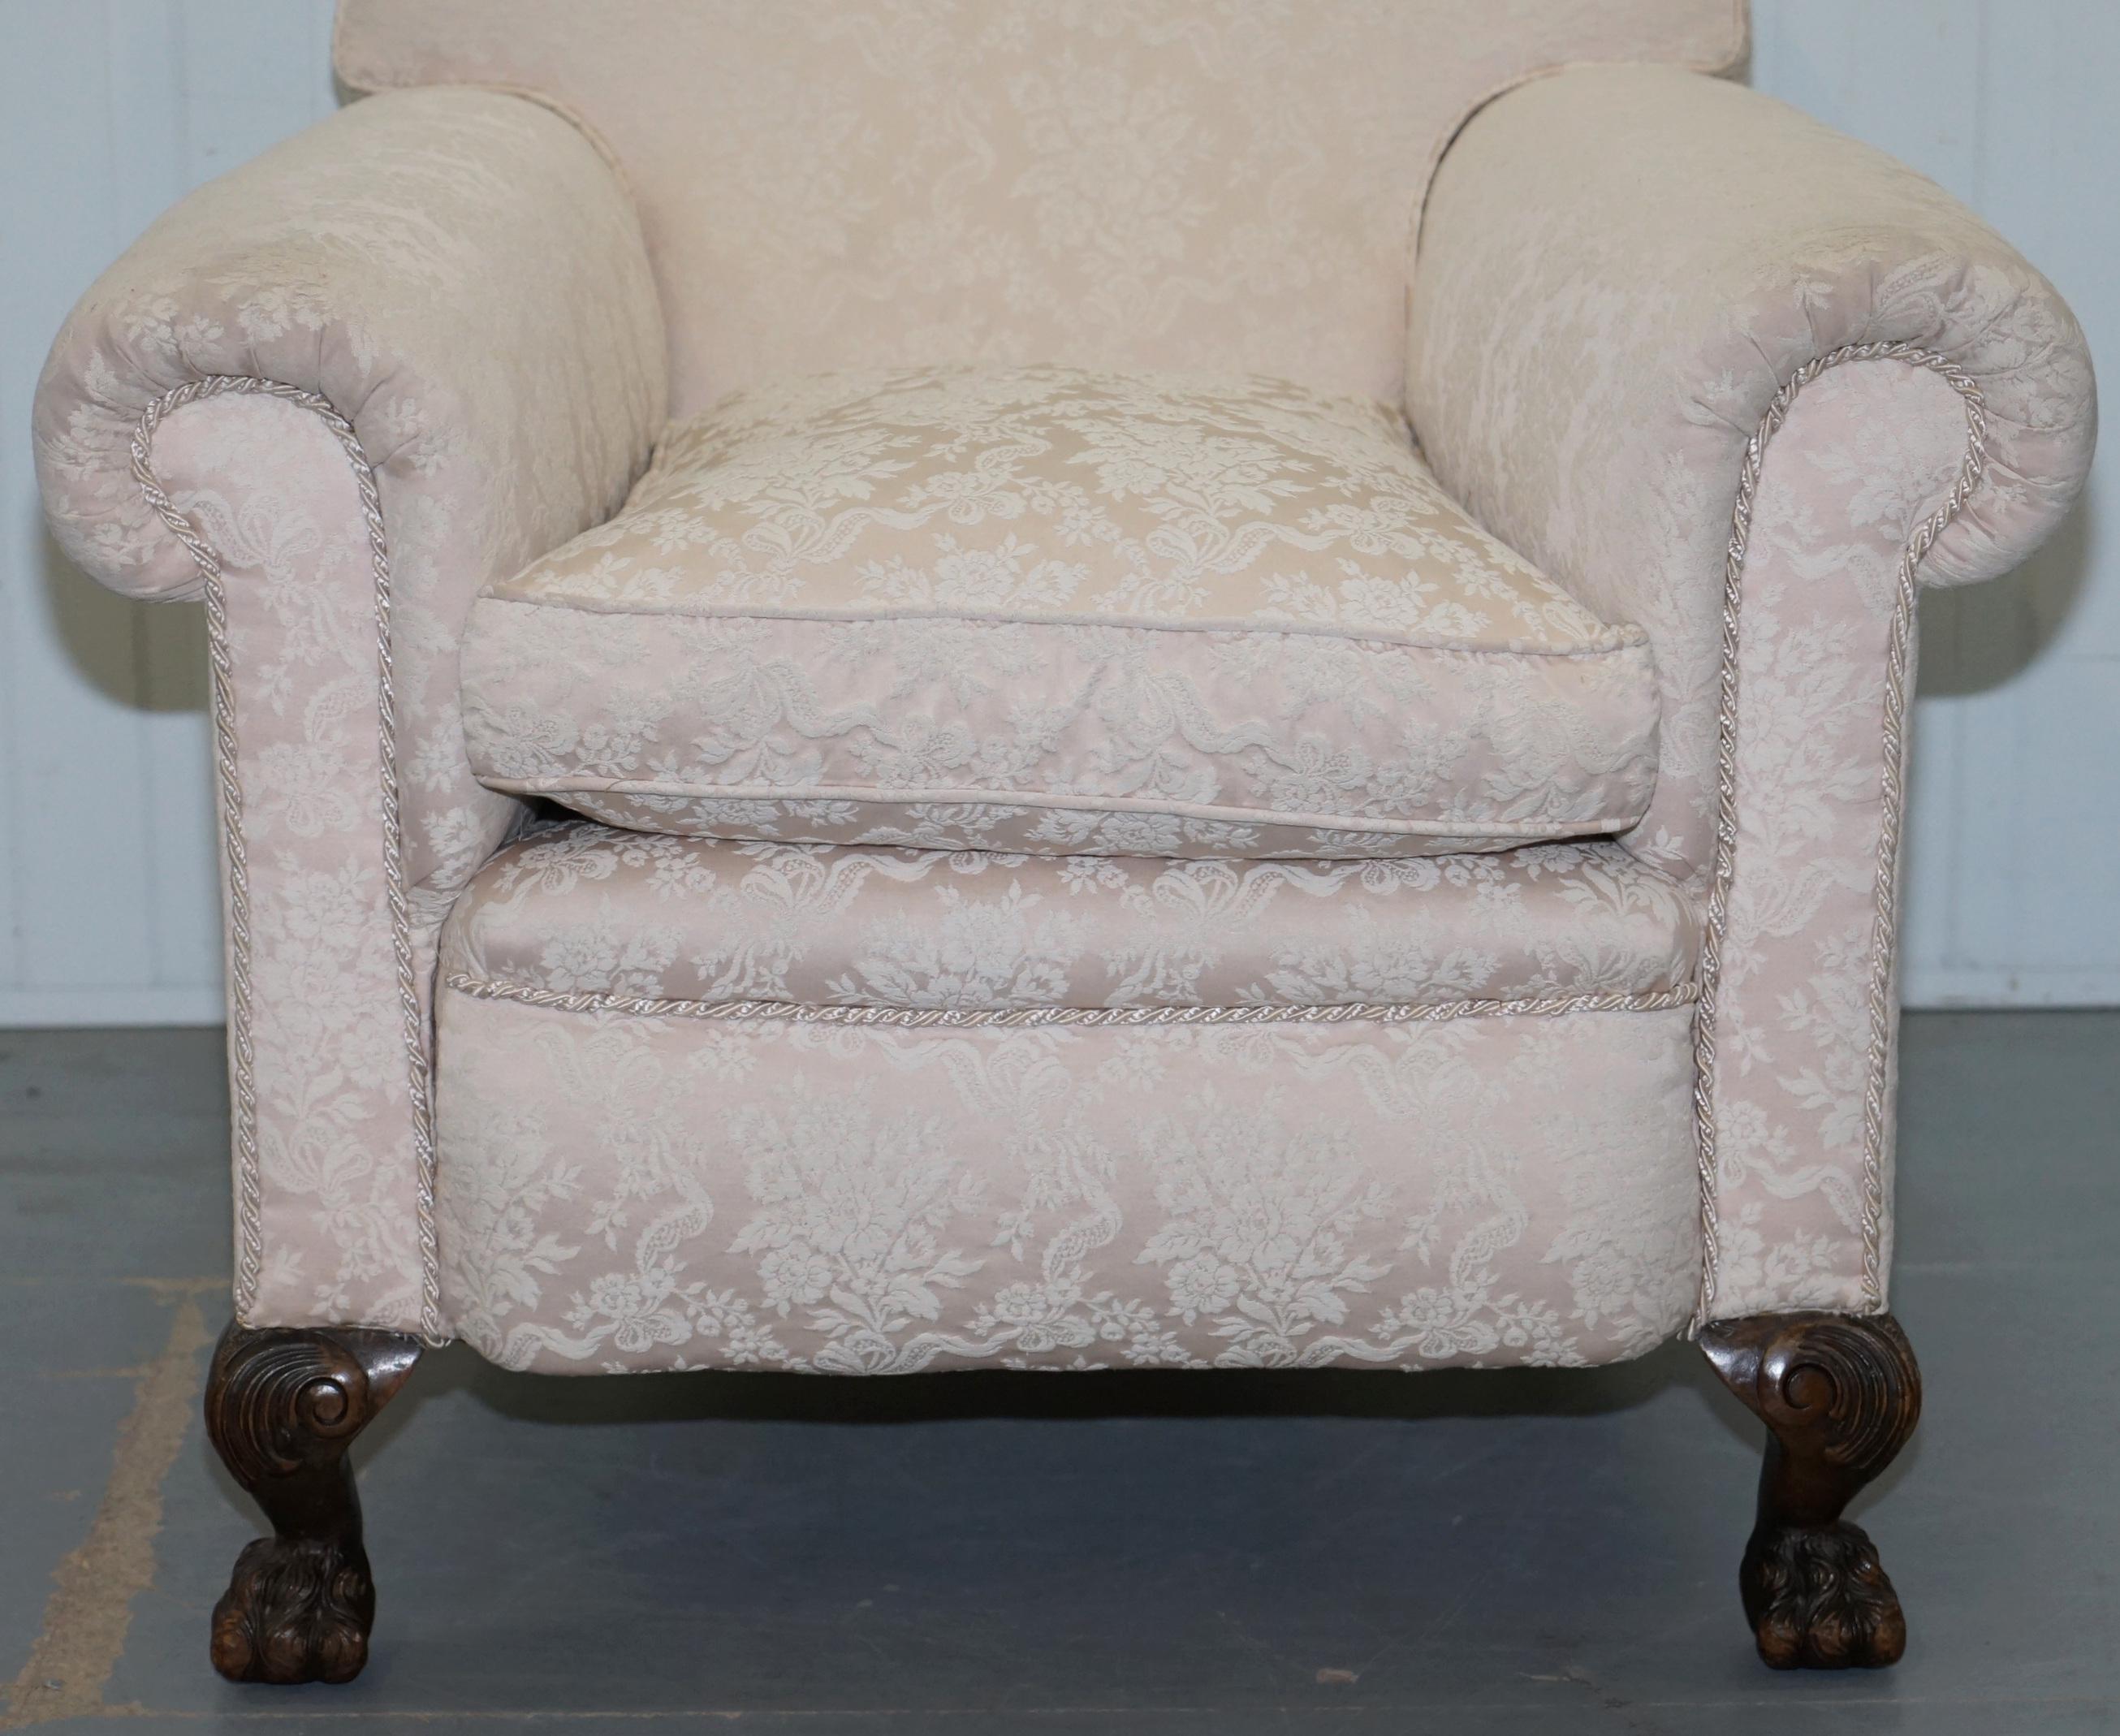 Rare Victorian Damask Upholstery Walnut Carved Lion Paw Feet Sofa Armchair Suite For Sale 11